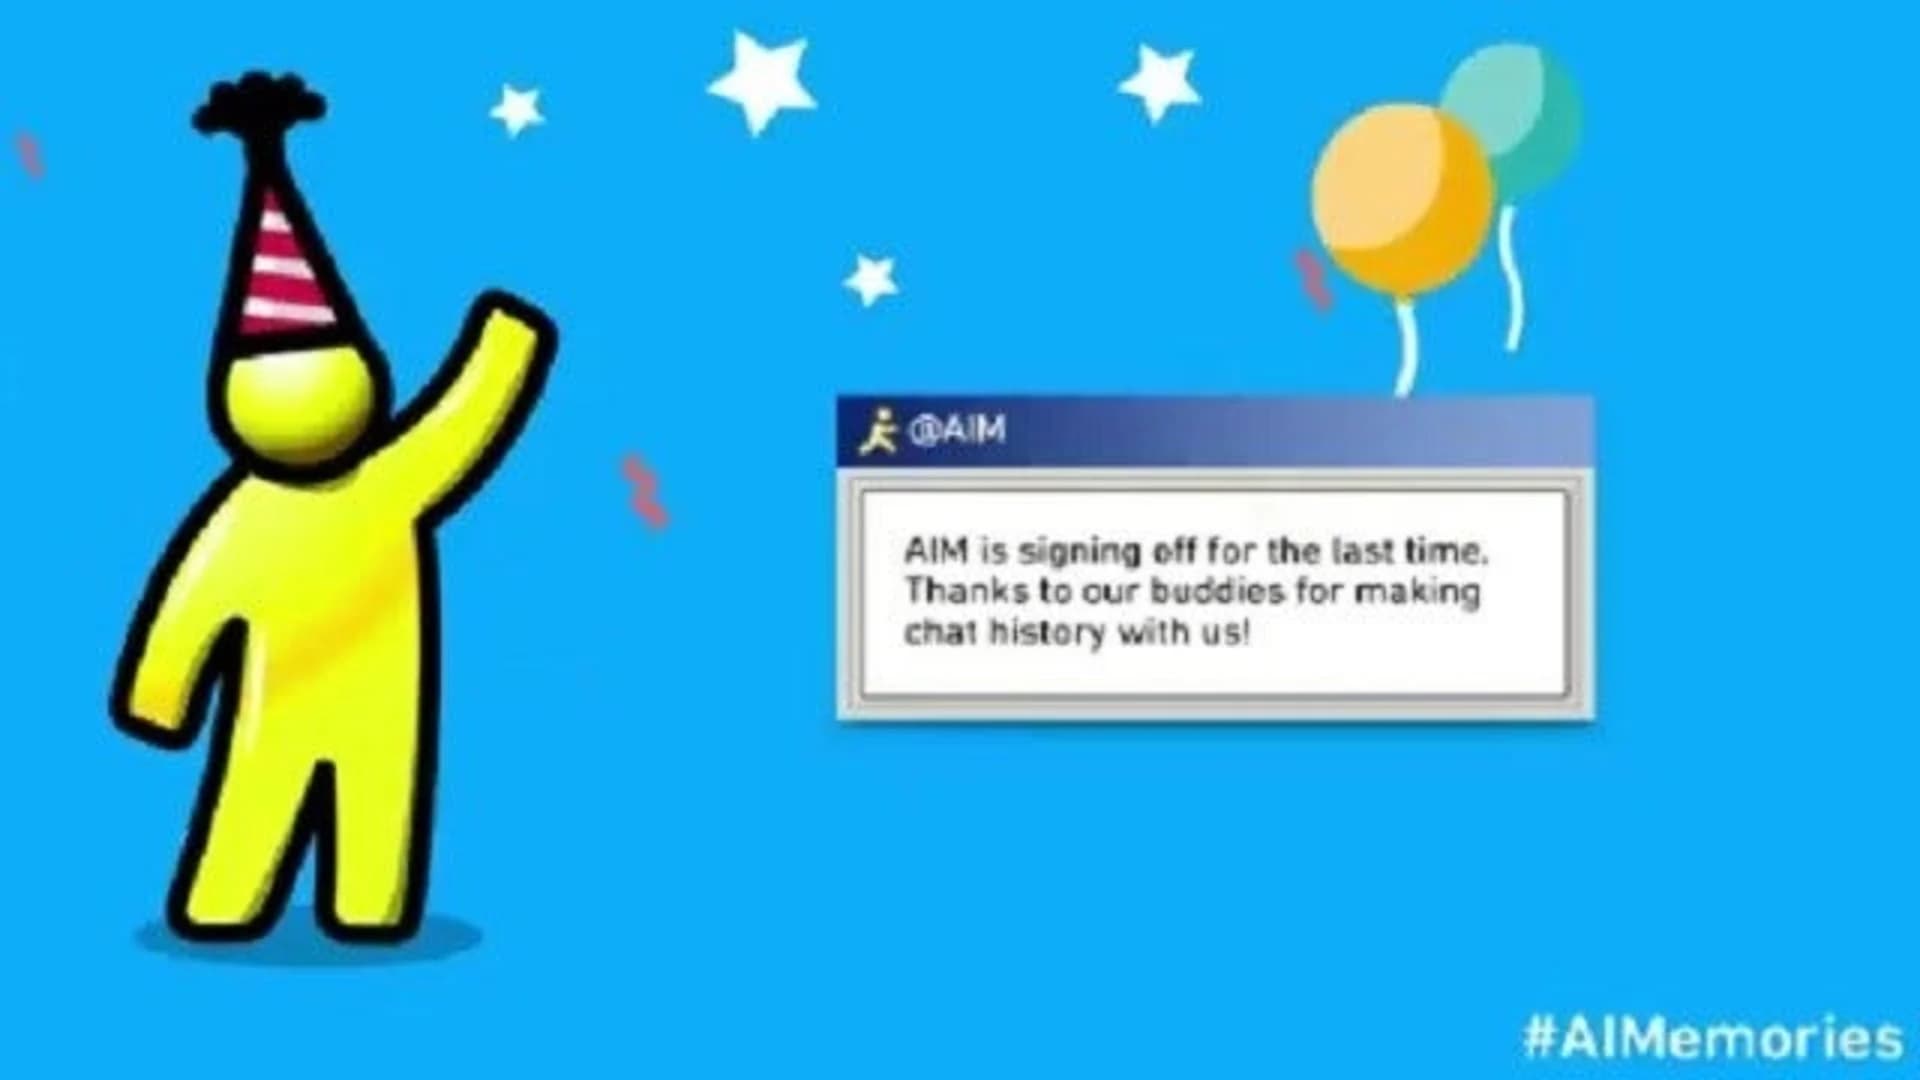 Goodbye: AOL discontinuing pioneering Instant Messenger